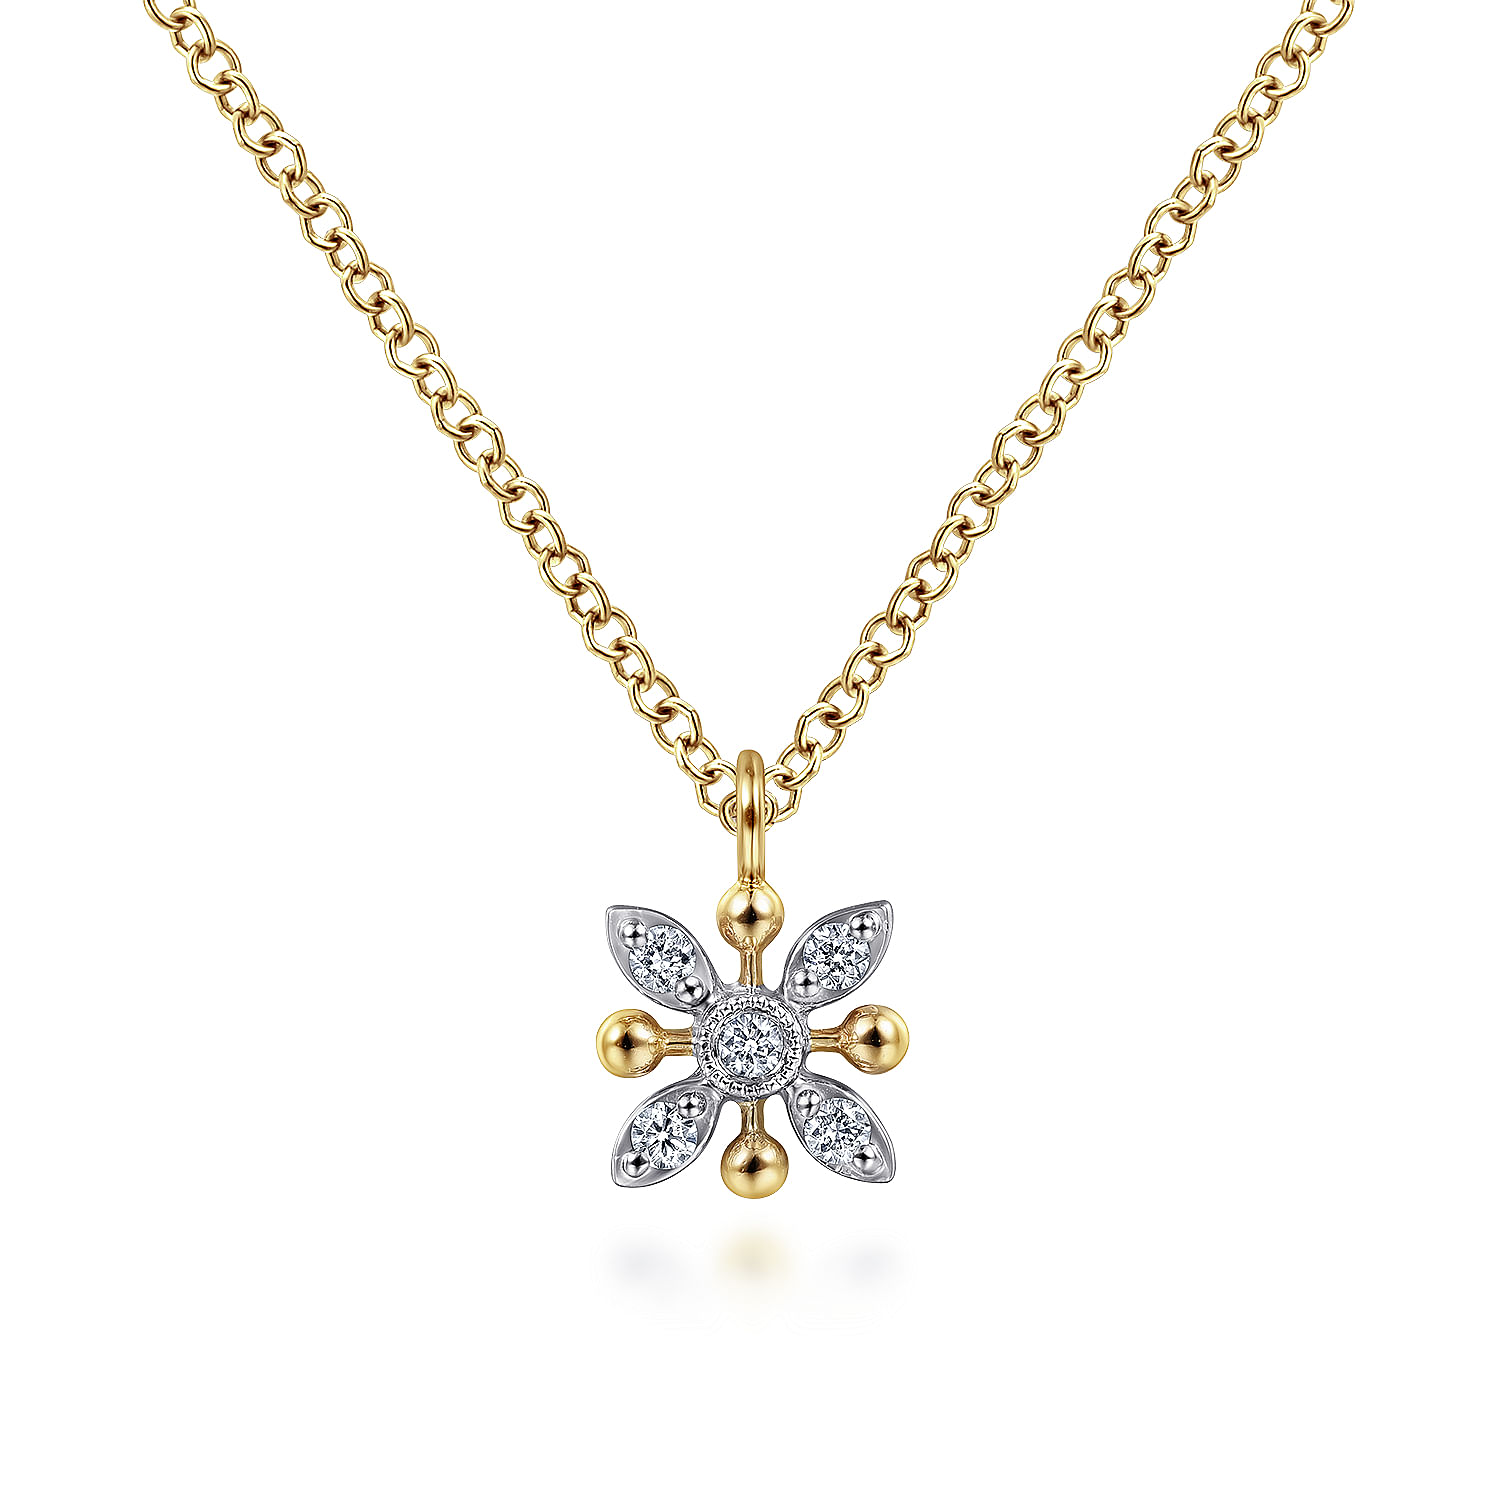 14K Yellow-White Gold Floral Diamond Pendant Necklace with Bujukan Beads